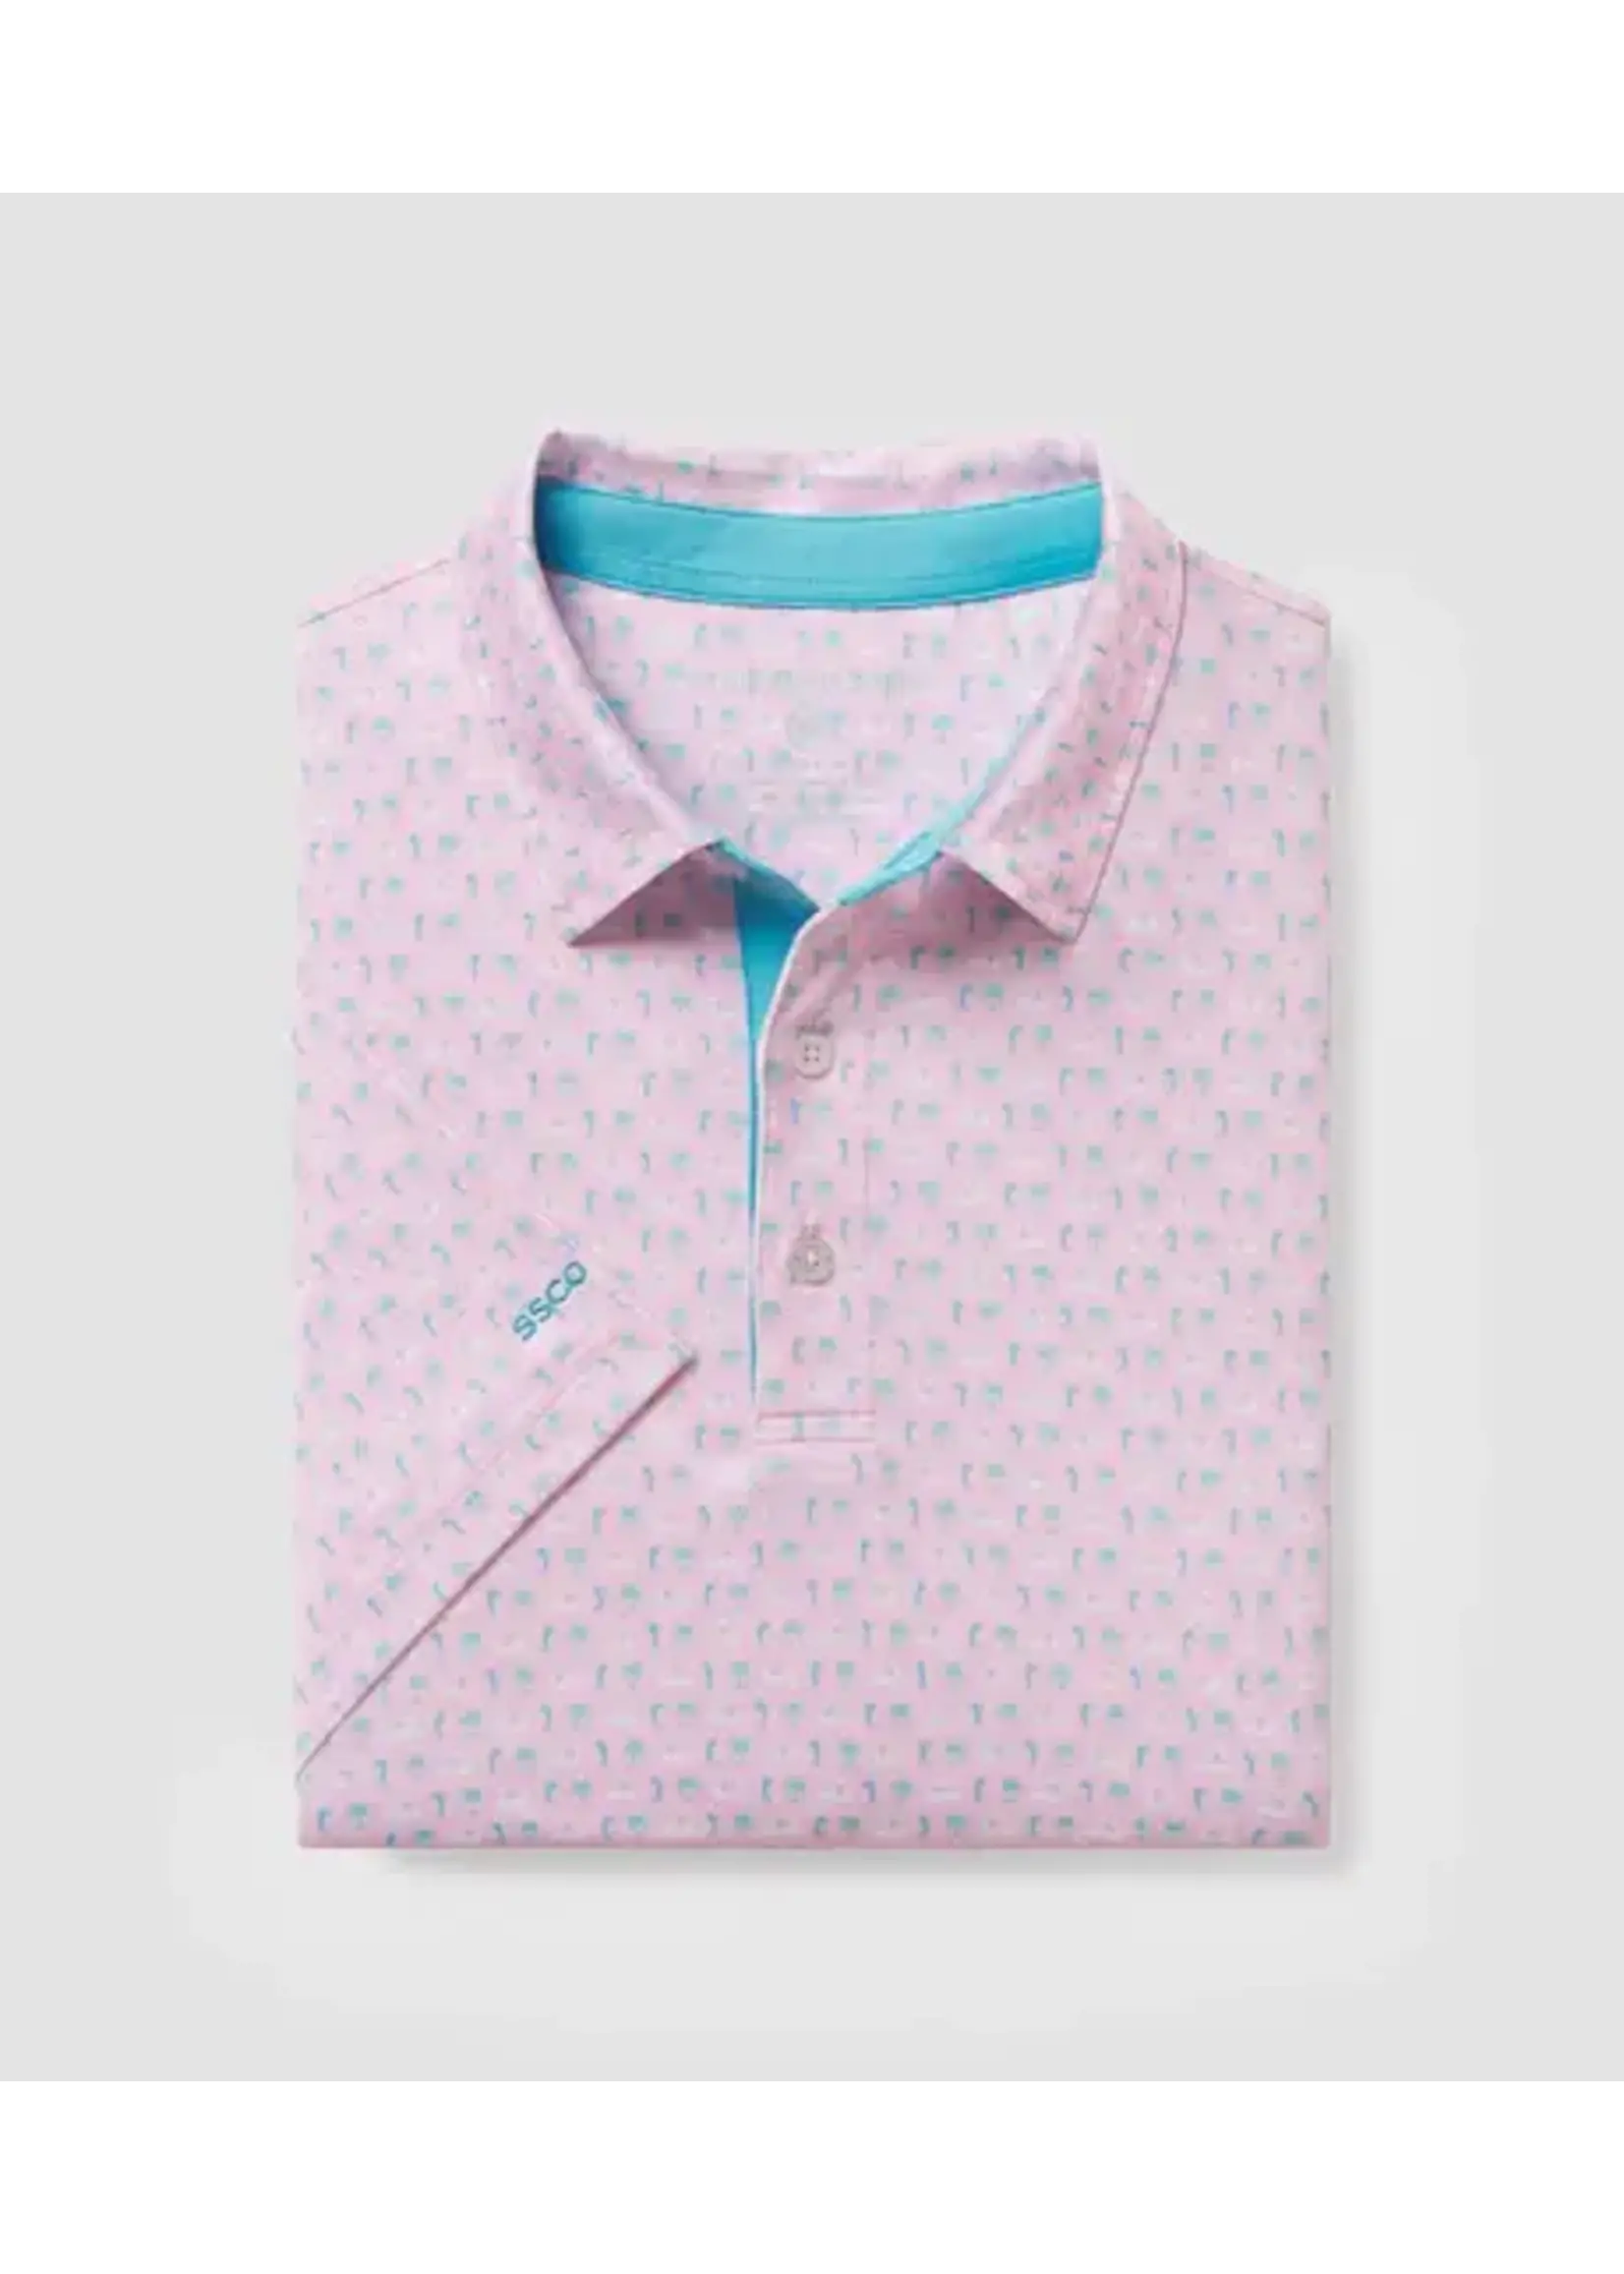 Southern Shirt Par Fore Printed Polo